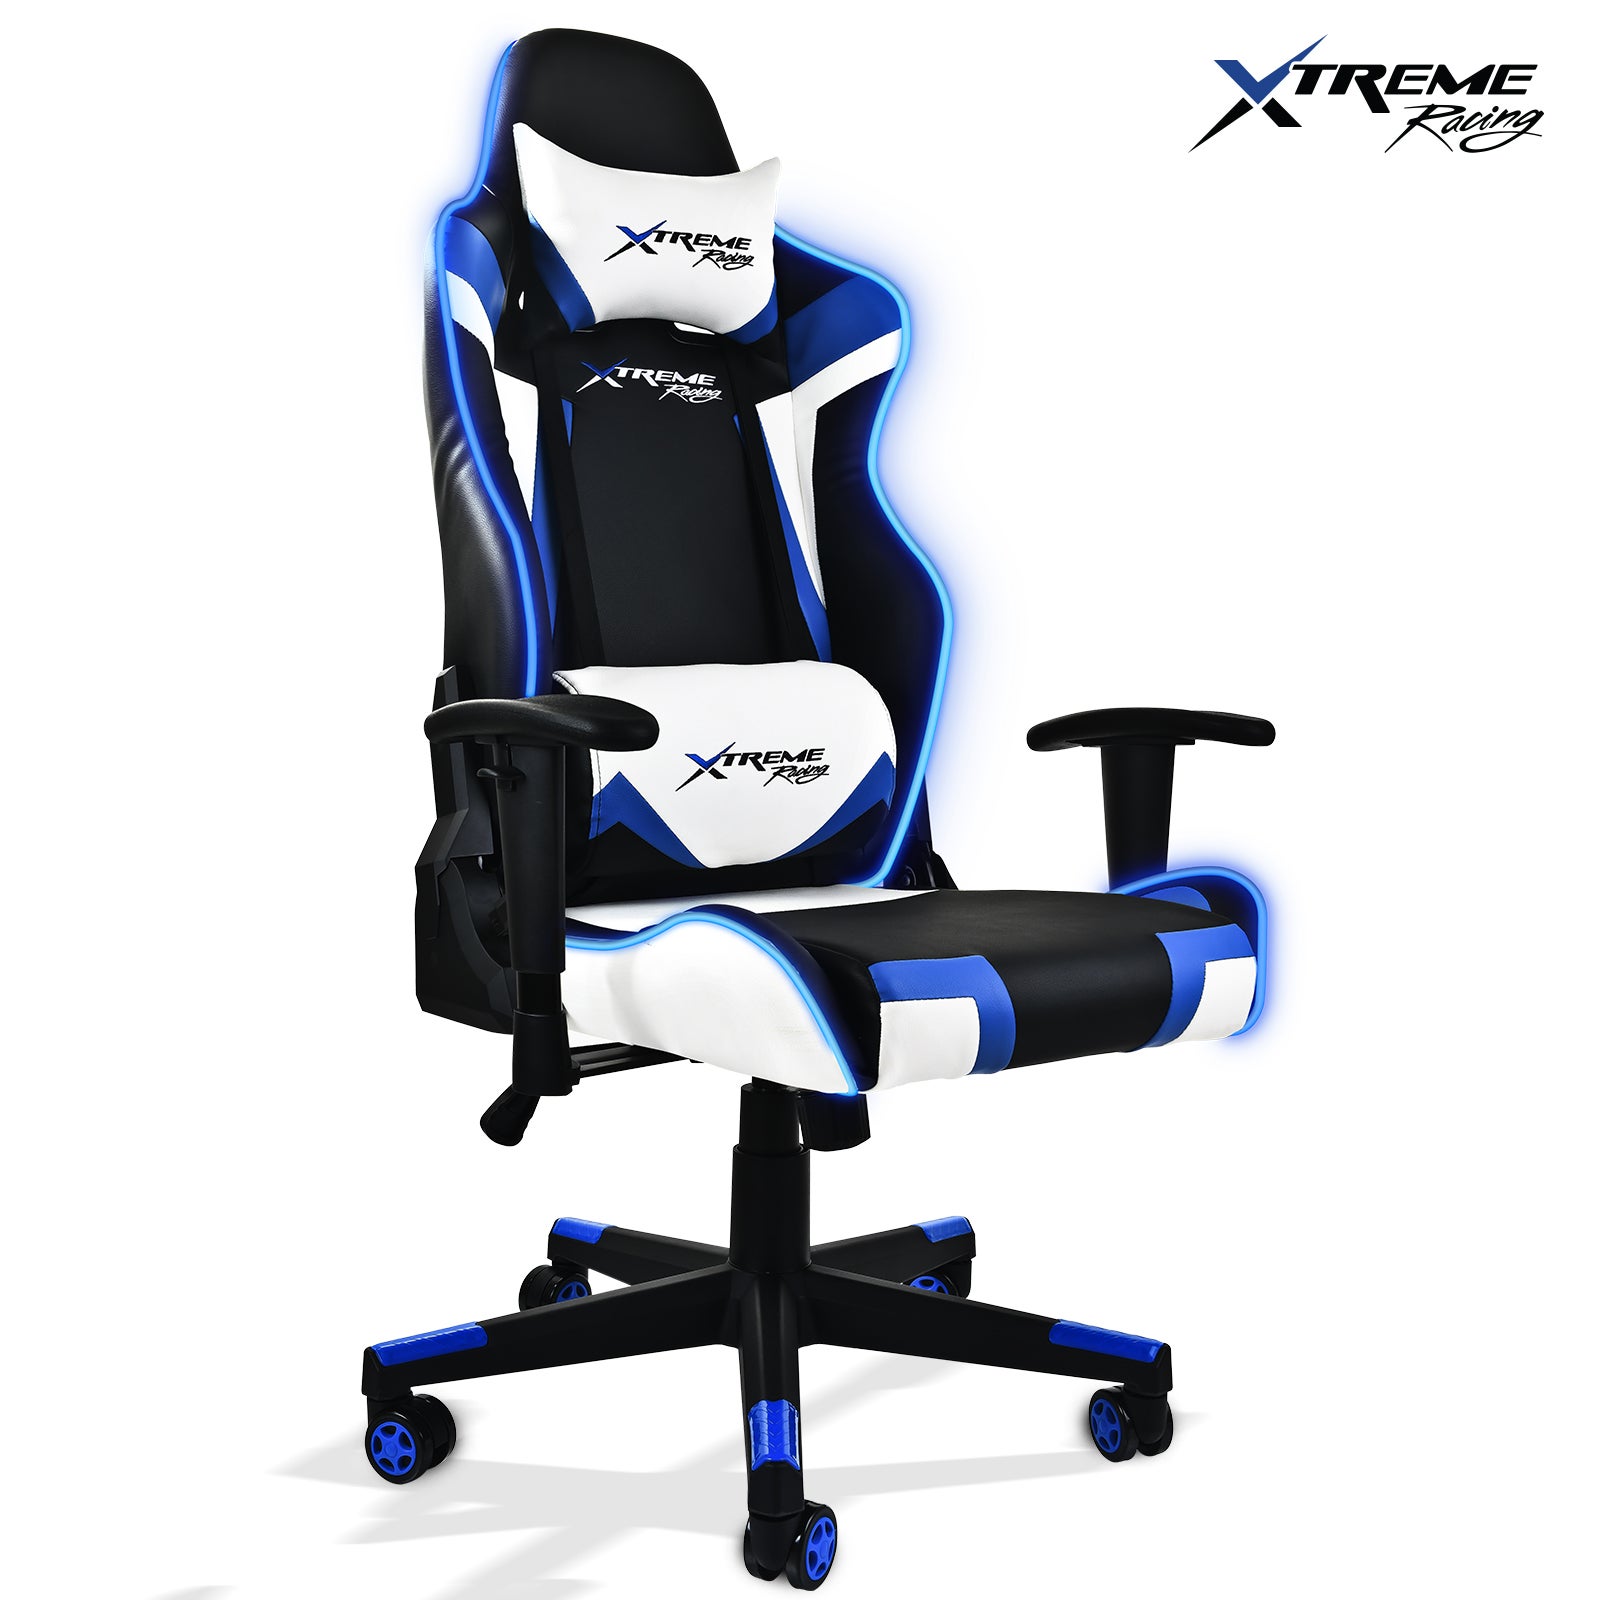 Xtreme Racing Gaming  Office Chair LED Seat  RGB PU Leather 